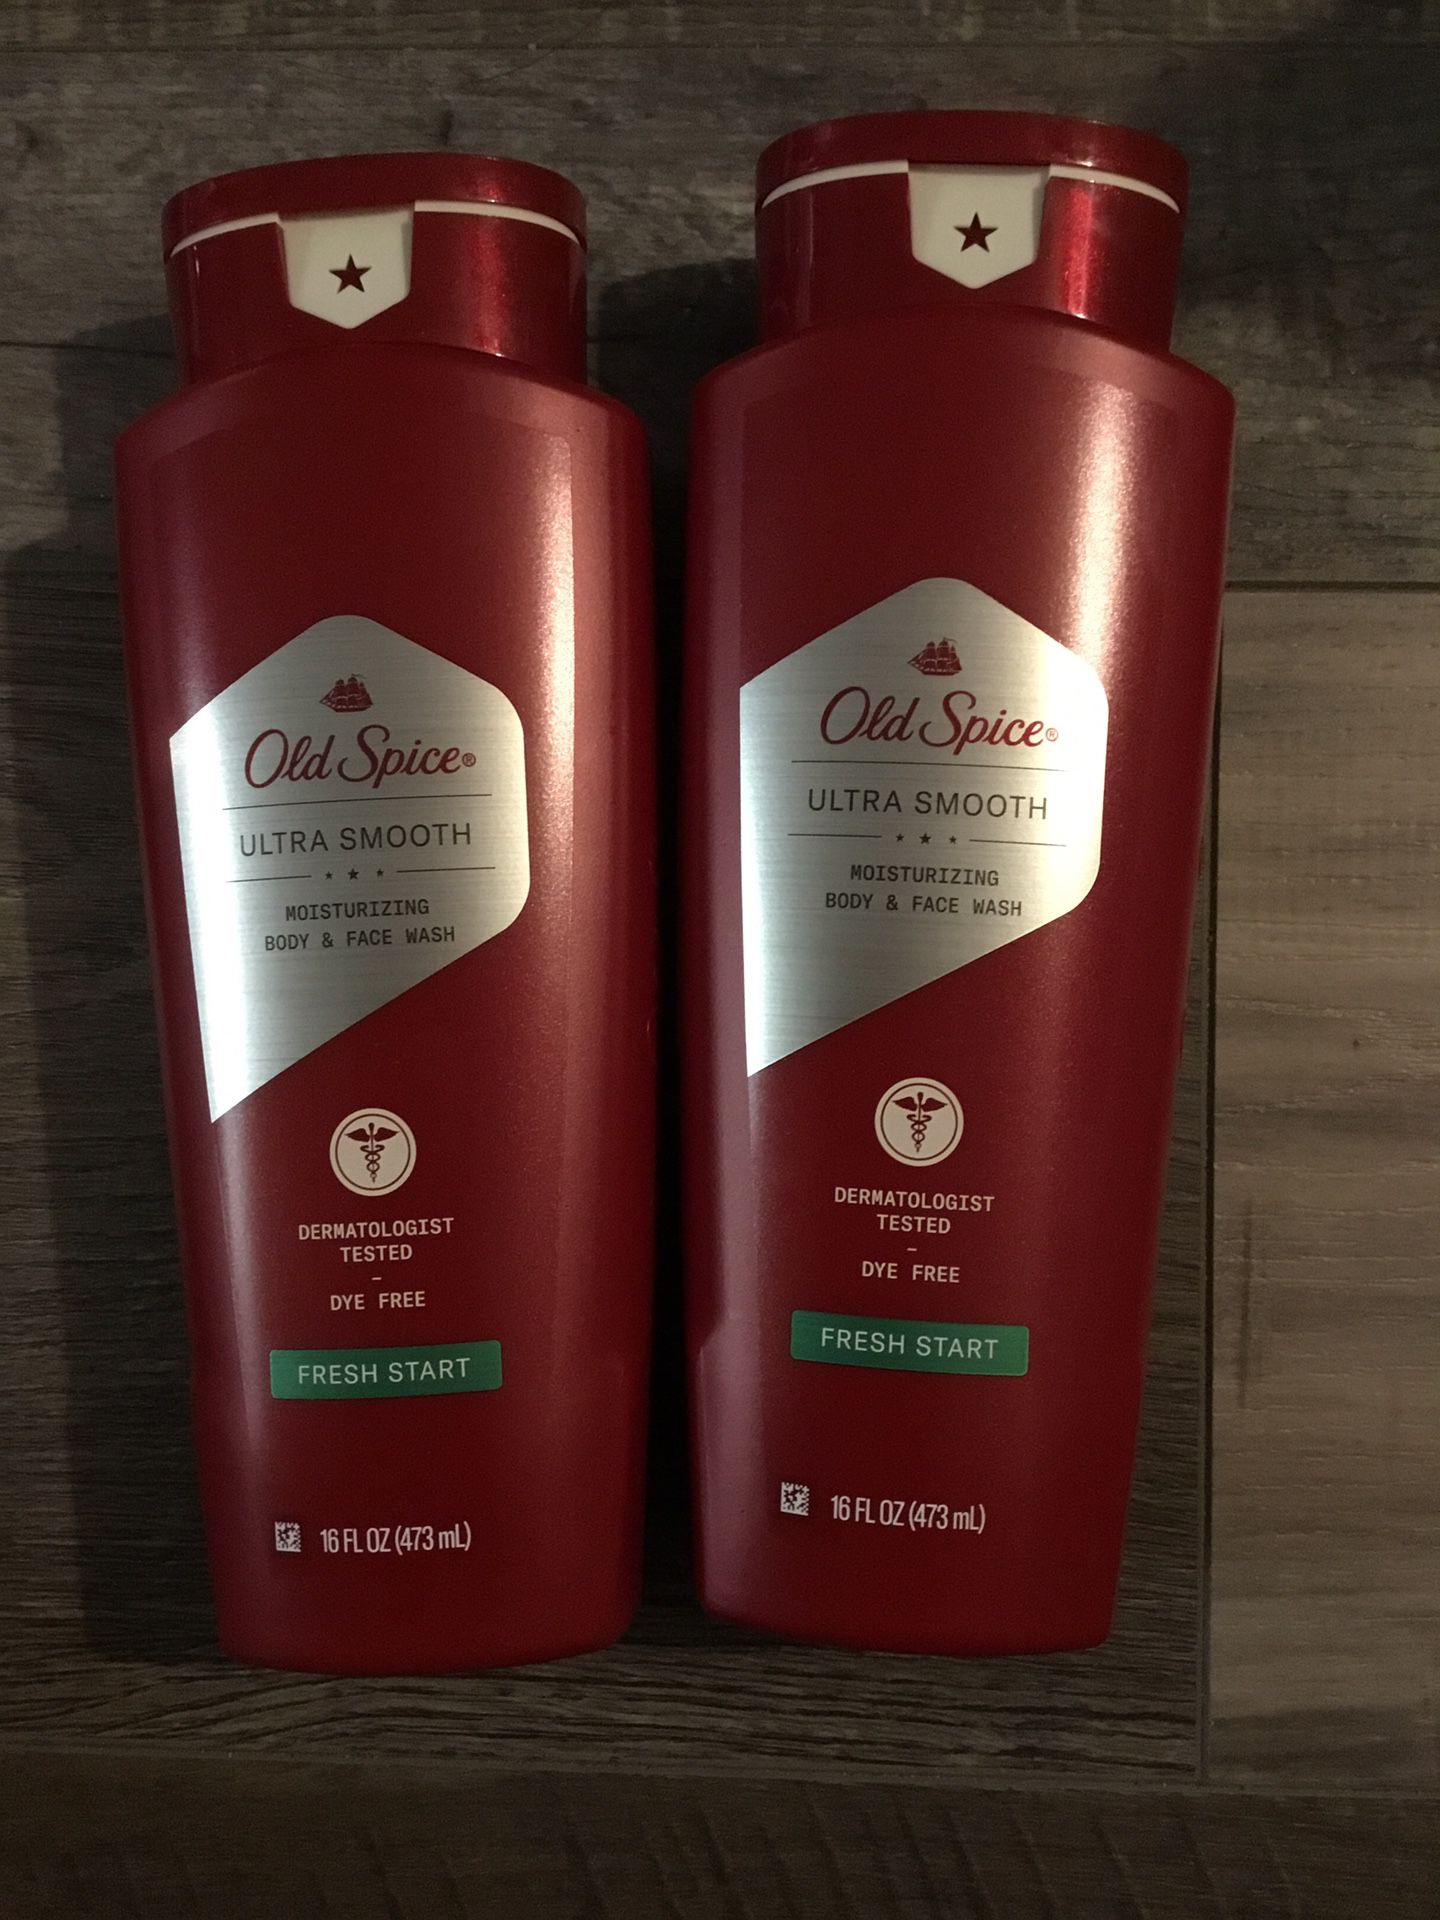 Old spice ultra smooth fresh start body & face wash $3.50 each